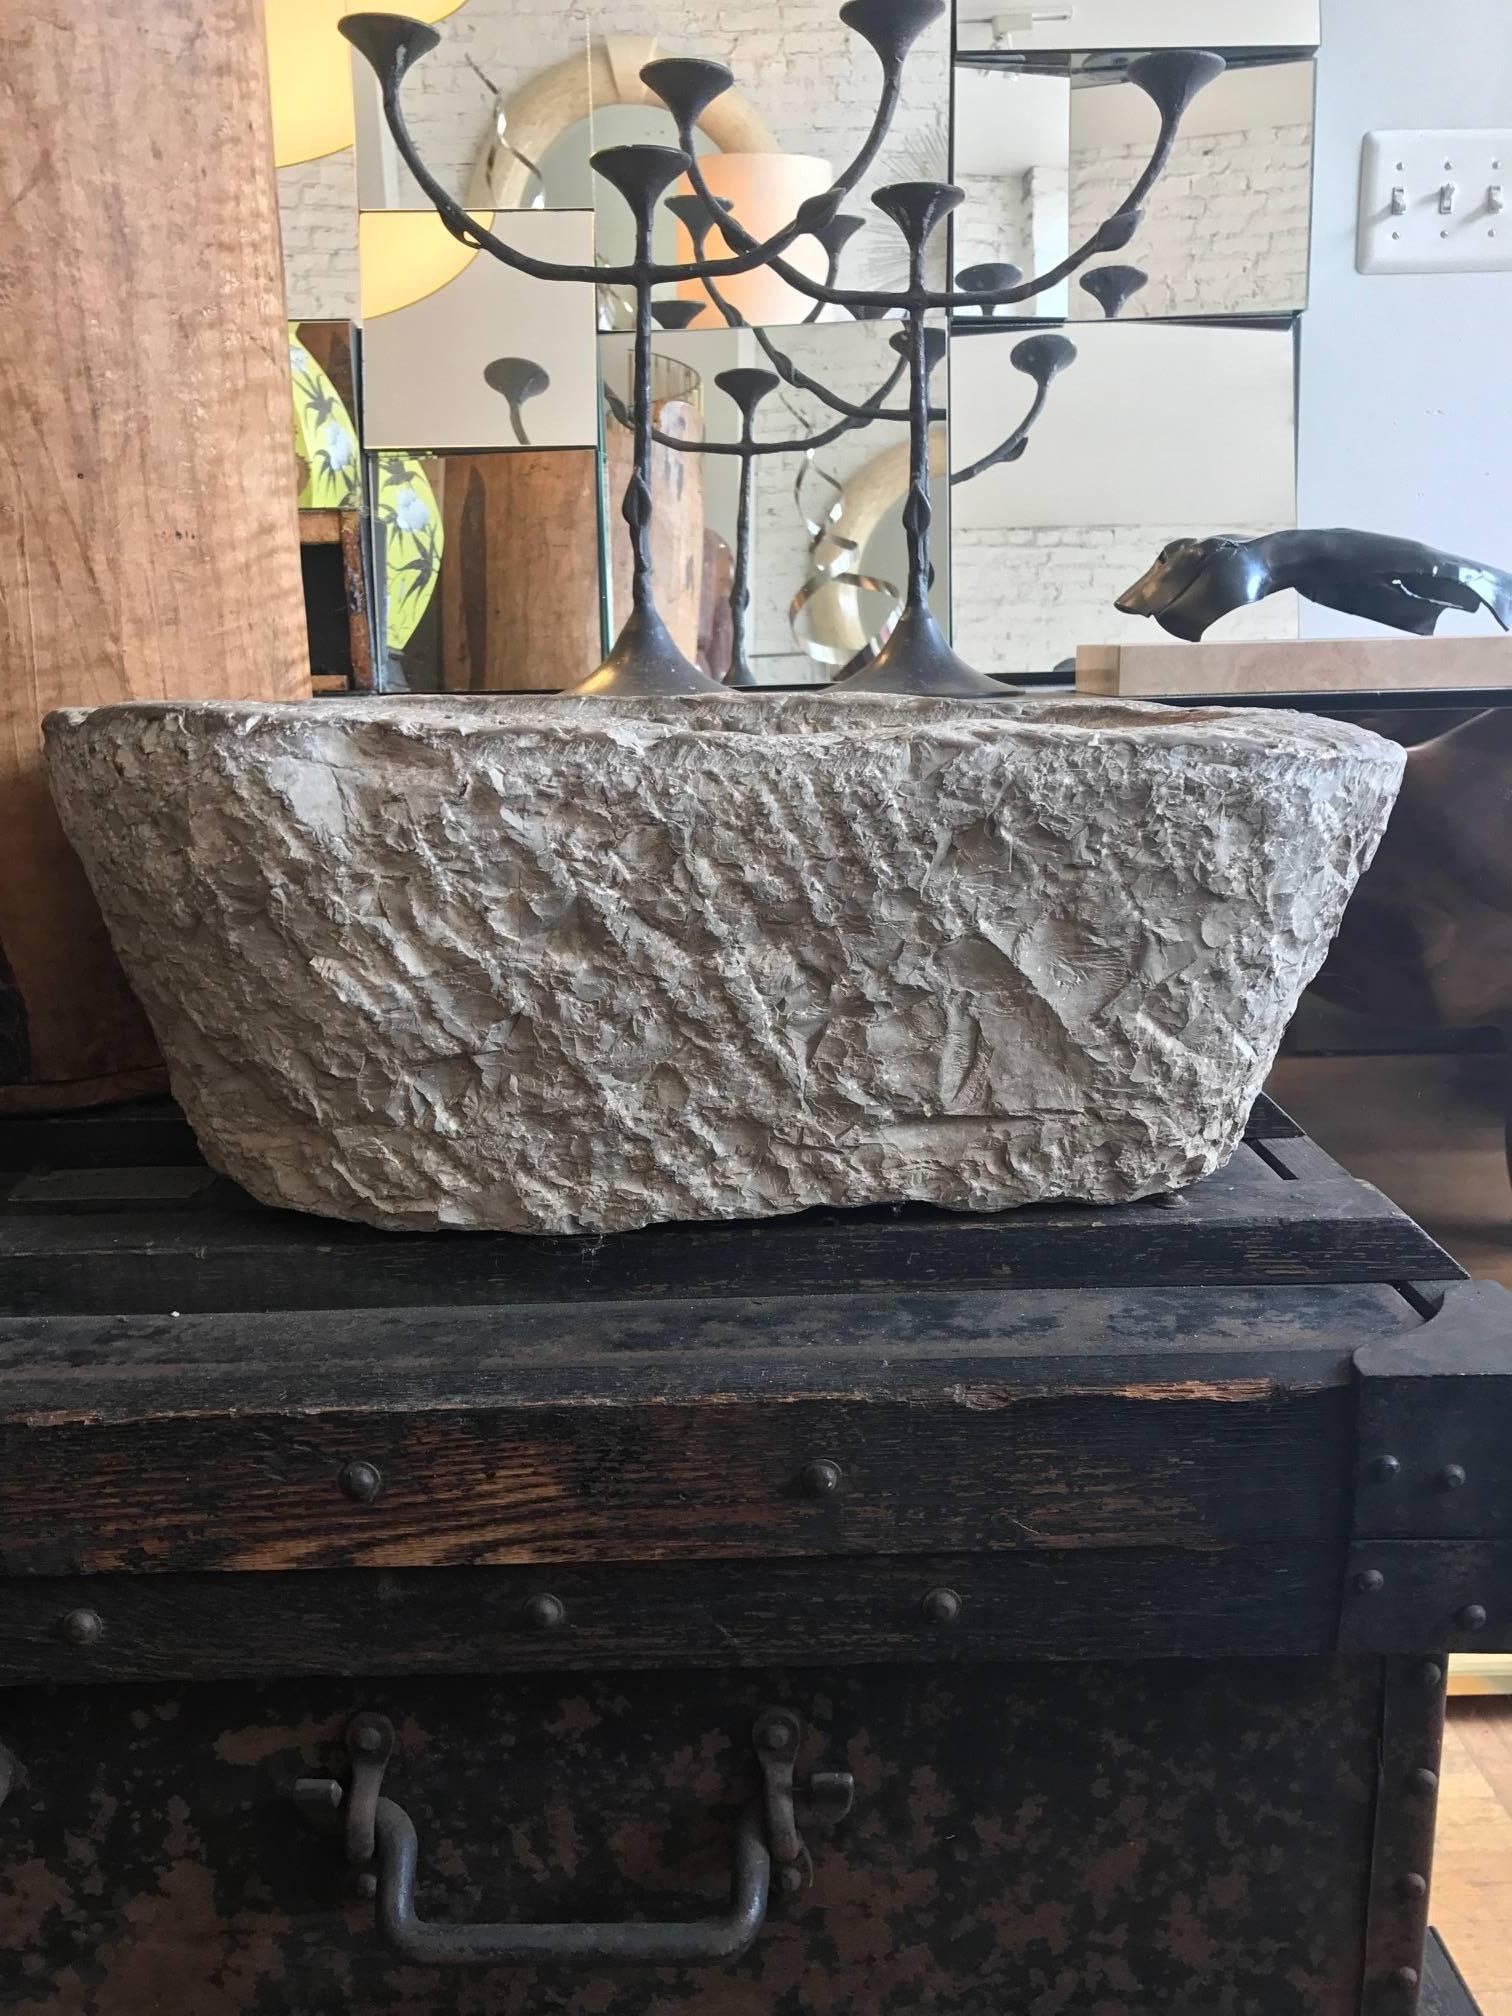 Hand-carved Chinese limestone oval mortar or trough. Fashioned out of a single block of limestone. Great inside or in the garden as a decorative vessel or a sculptural birdbath.